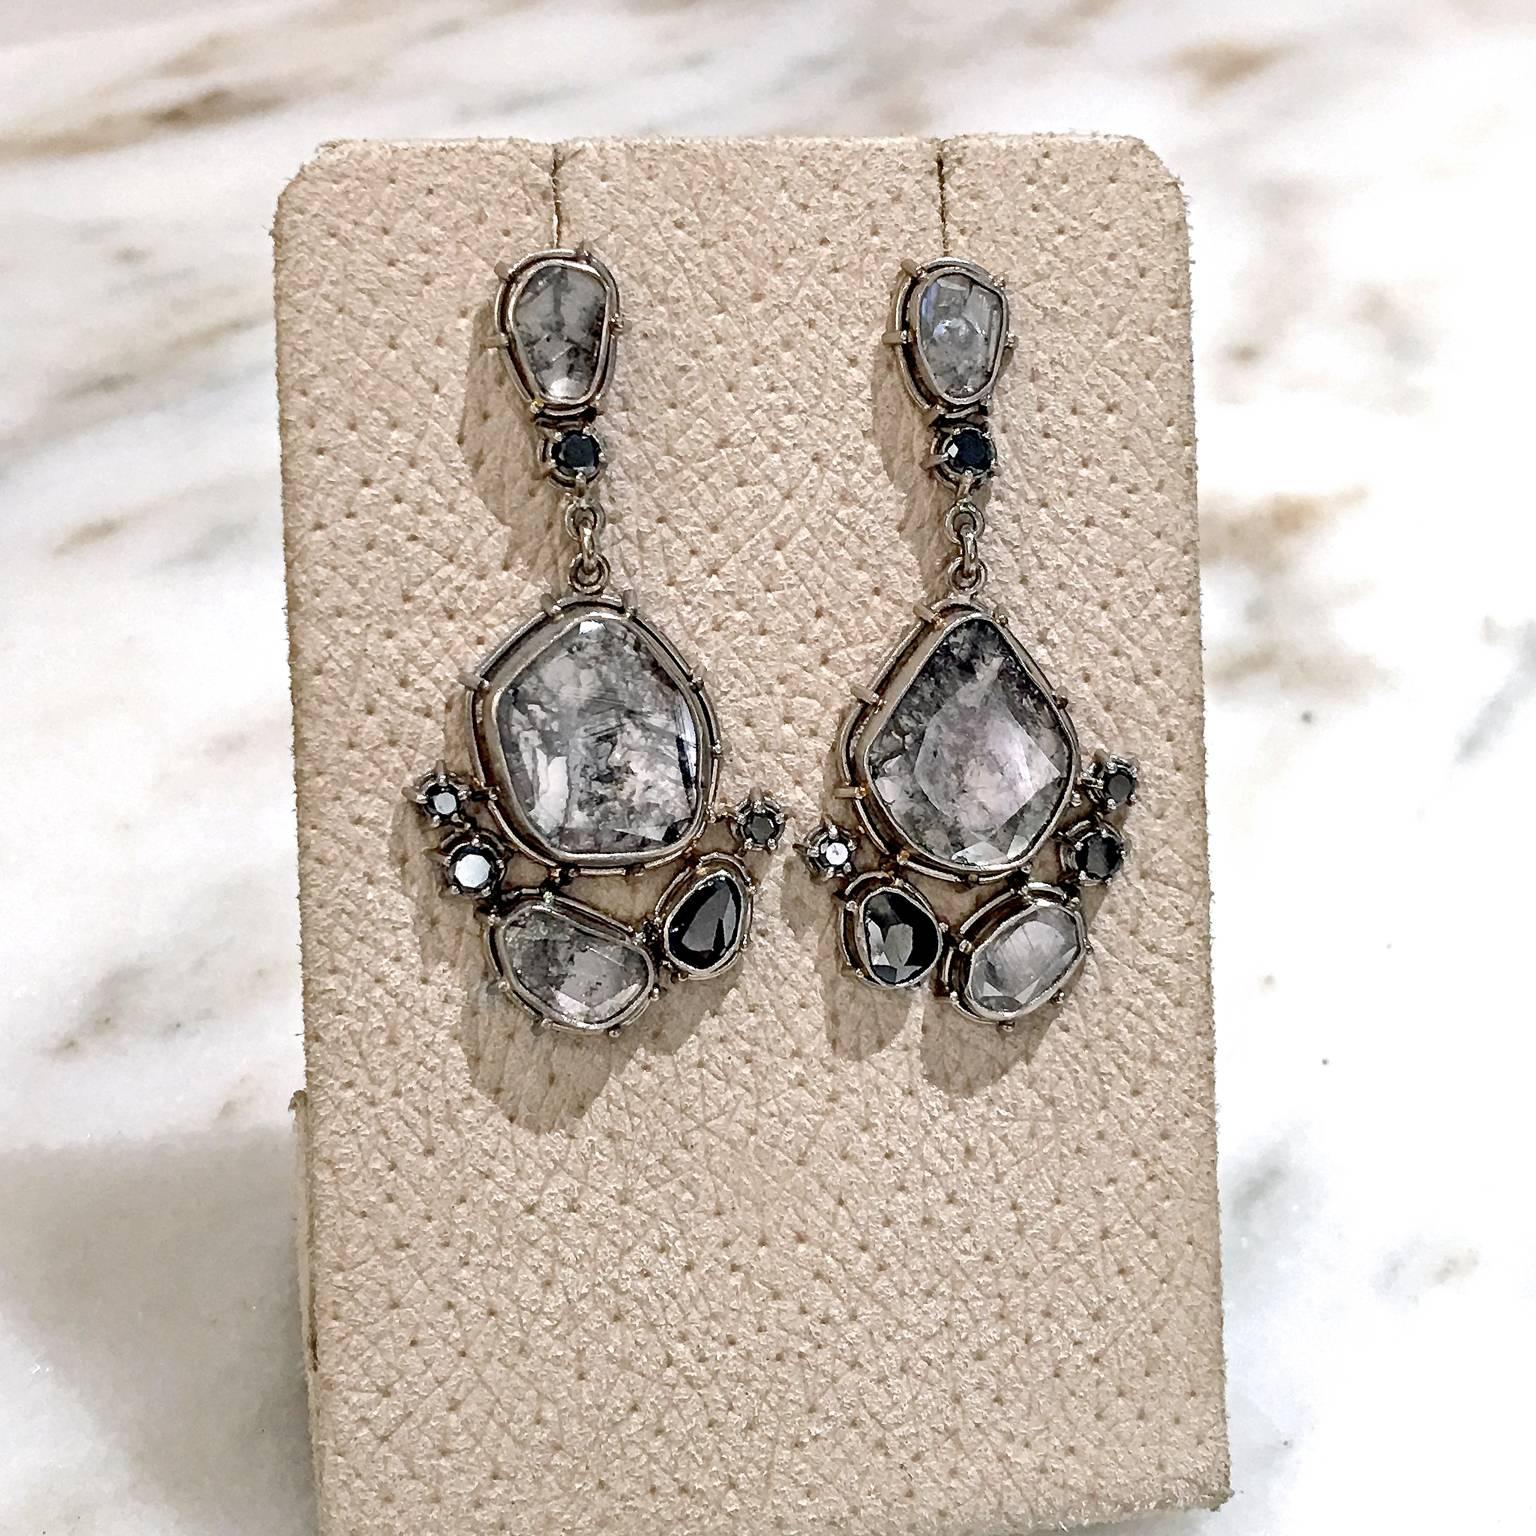 One of a Kind Earrings handcrafted in 18k white gold-palladium showcasing assorted shimmering gray and black faceted diamonds.

Stamped and Hallmarked 18k / Tura